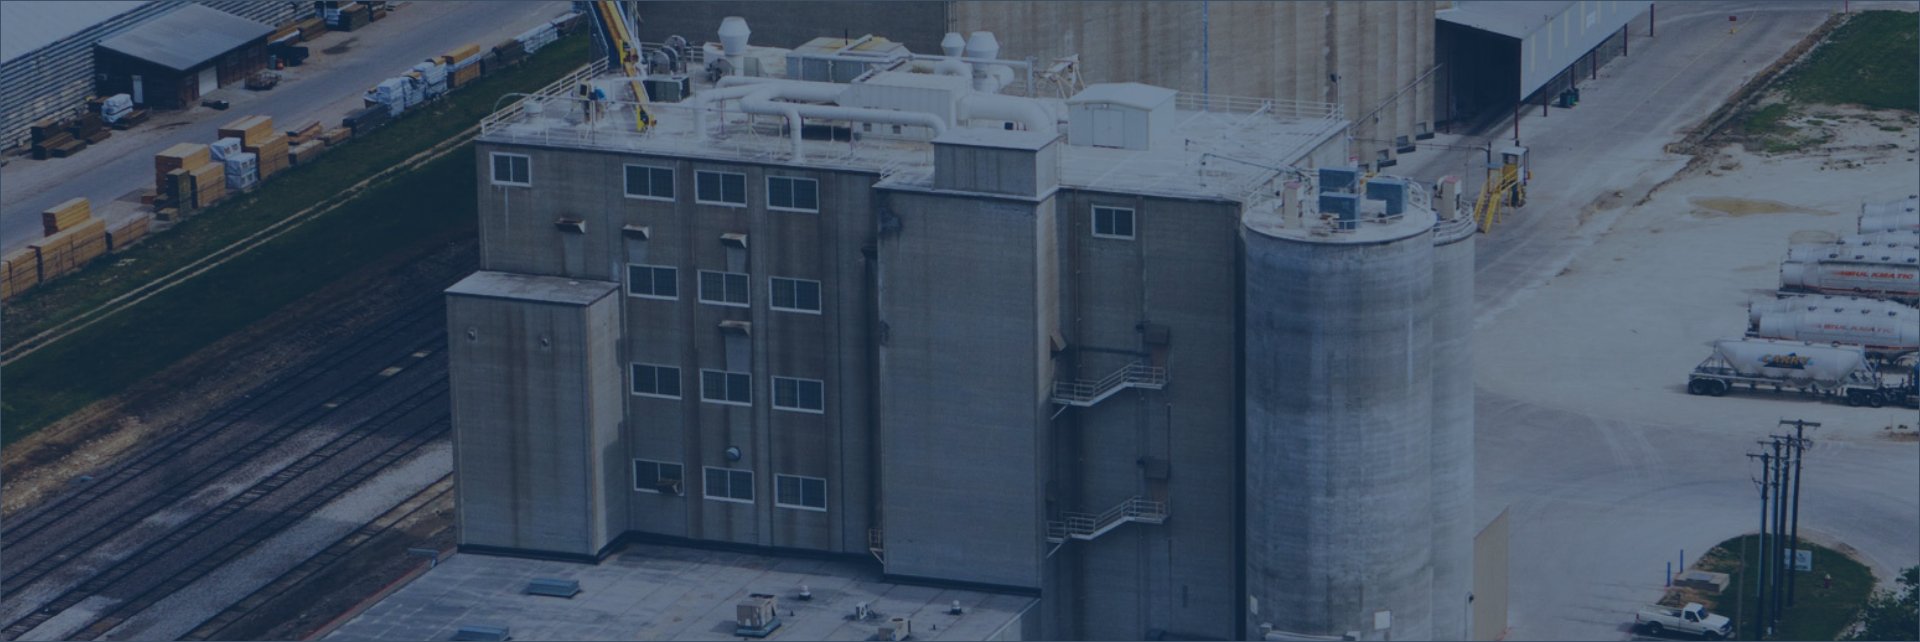 Miller Milling to Expand Saginaw, TX Flour Mill